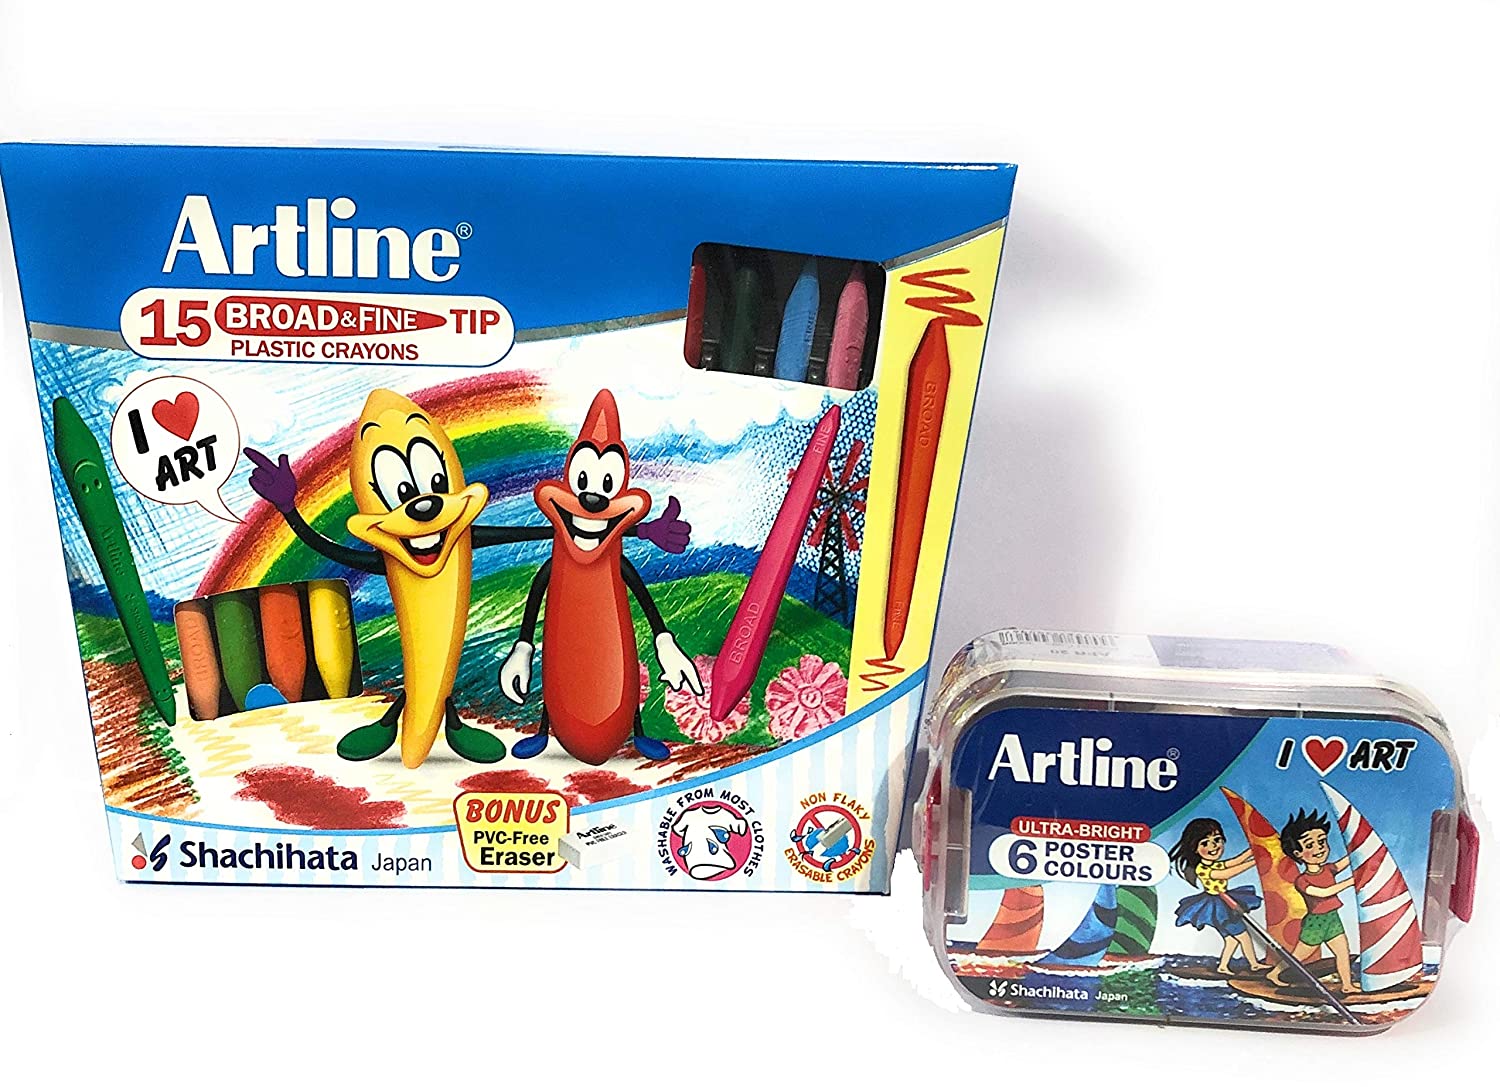 Detec™ Artline Broad and Fine Tip Plastic Crayons 15 Shades with Ultra Bright 12 Poster Colors